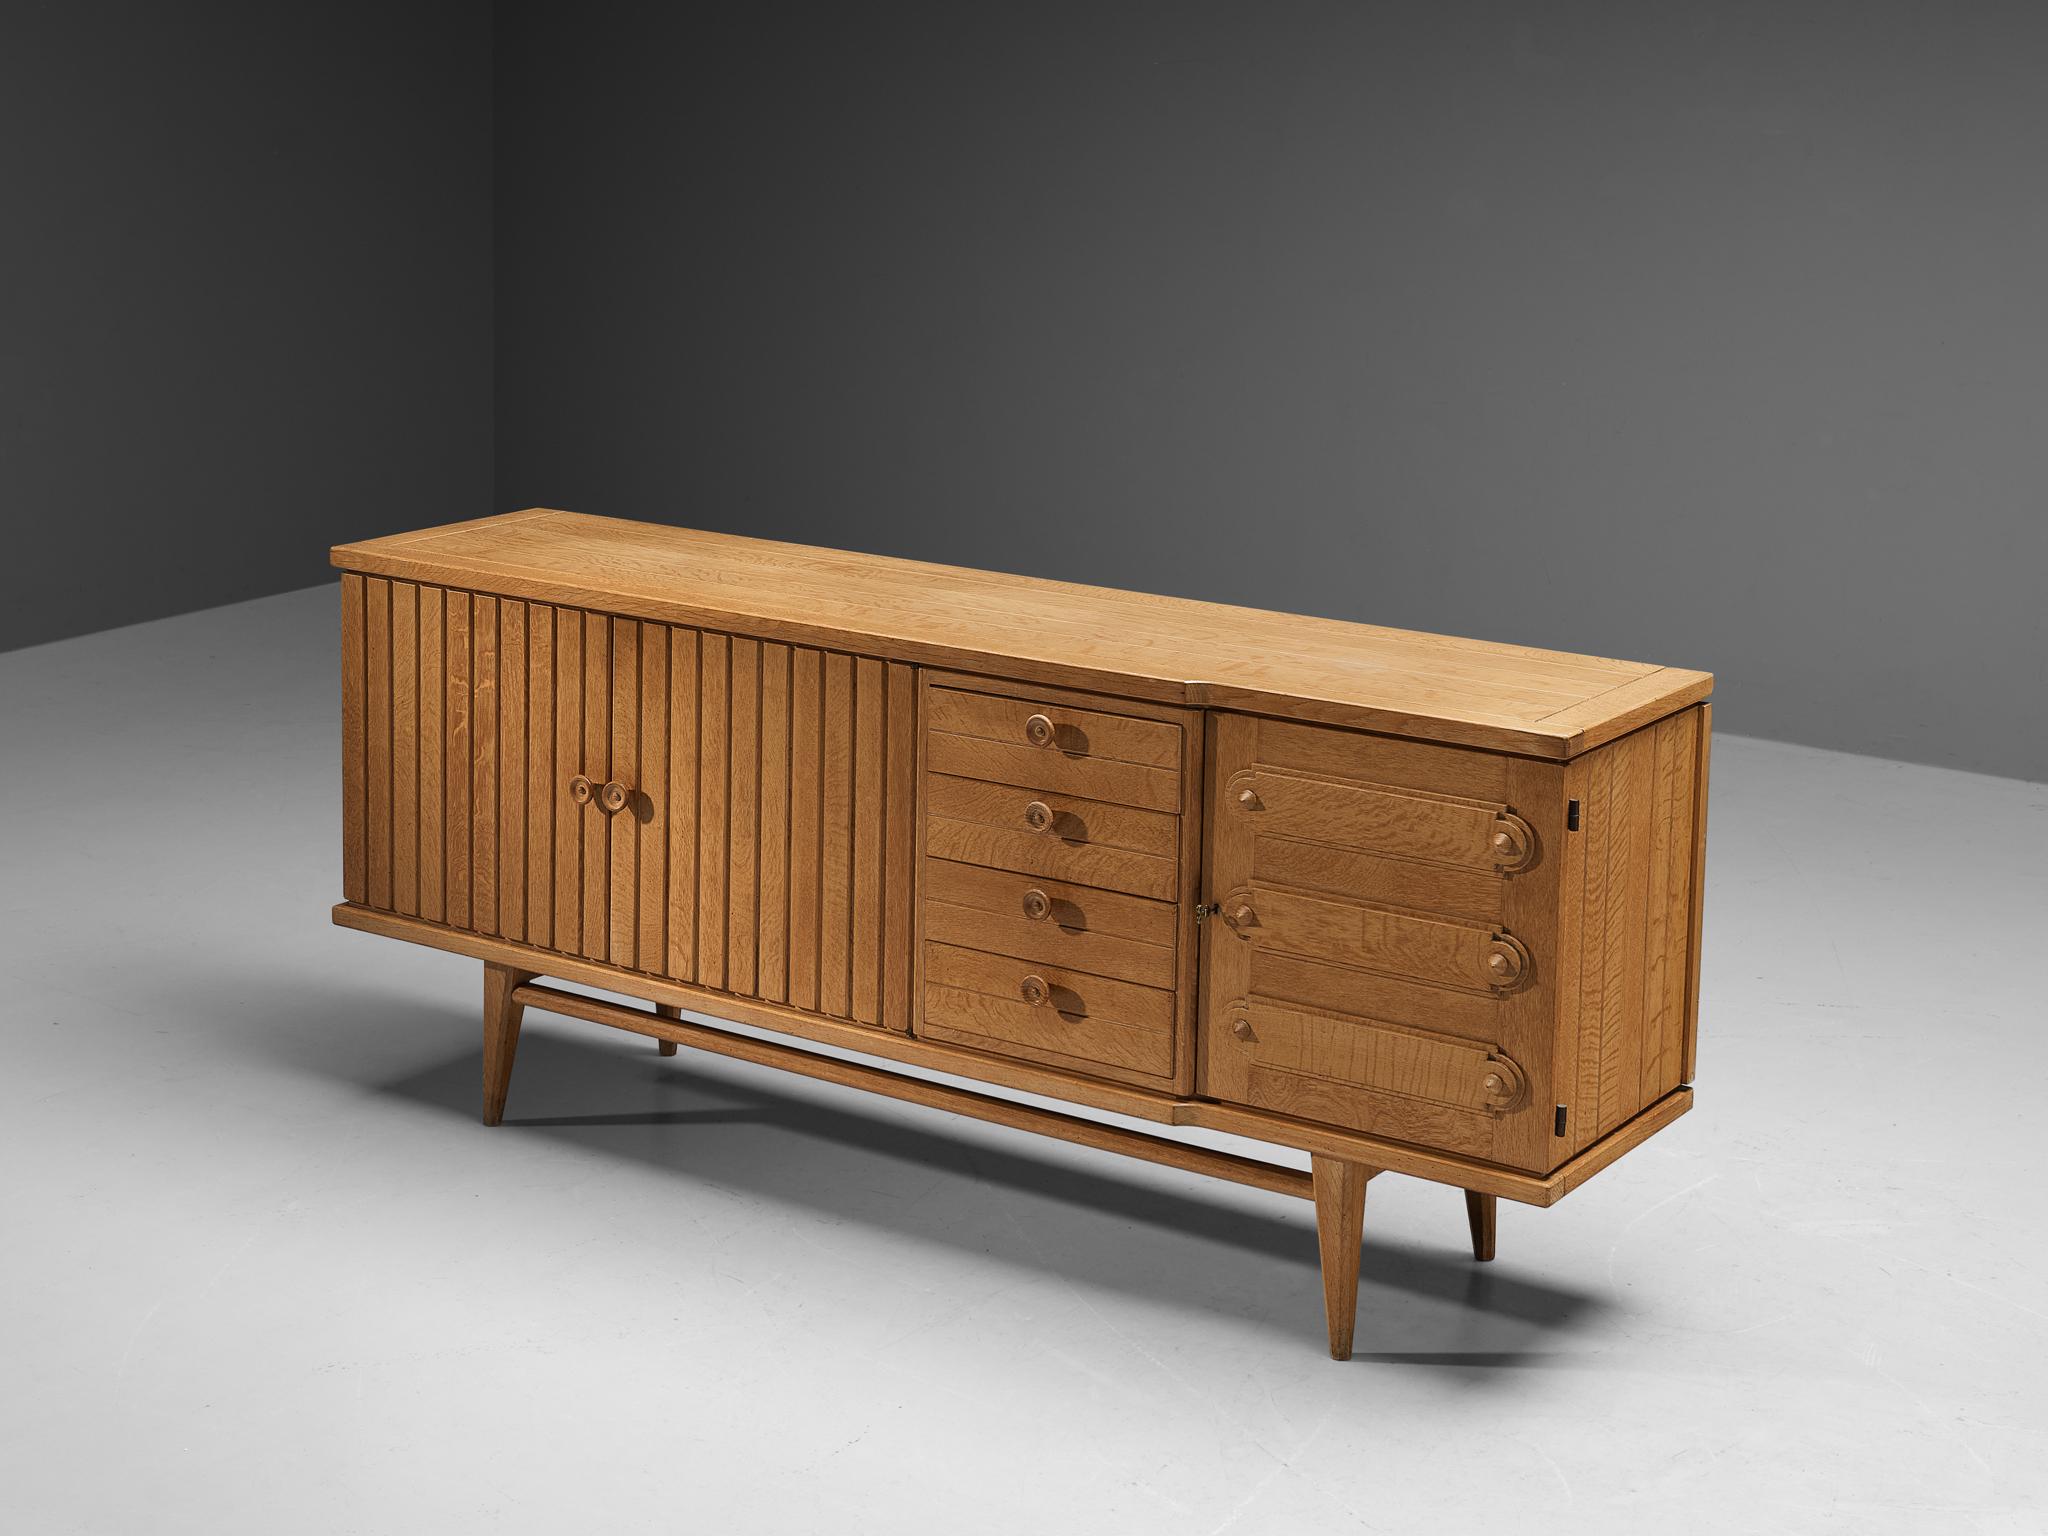 Sideboard, oak, brass, France, 1960s

French sideboard made in oak with beautiful grain and detailing. With the vividly designed fronts and the functional and versatile storage facilities this high-quality sideboard serves both visual and practical